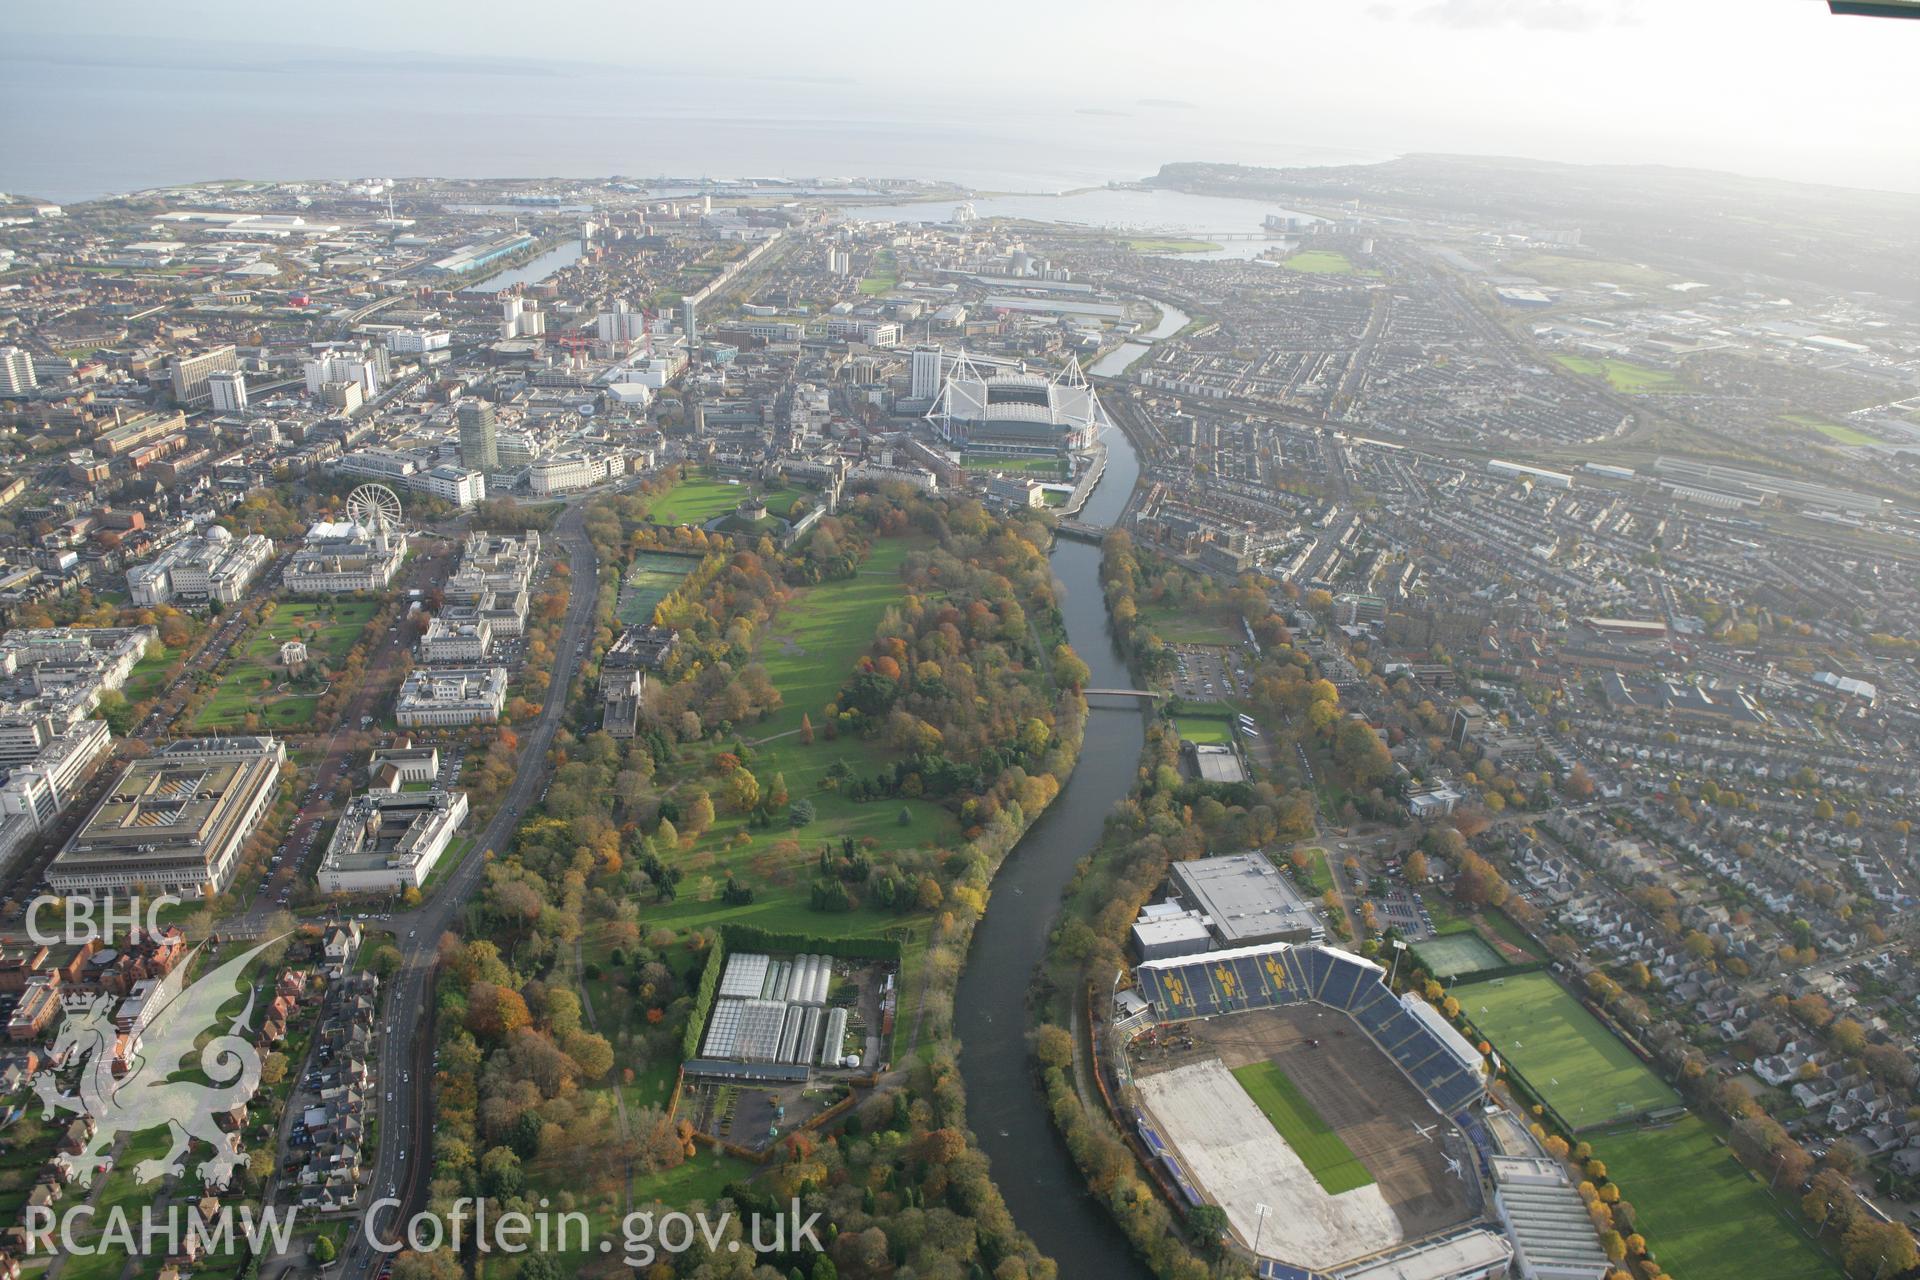 RCAHMW colour oblique photograph of Cardiff University and Bute Park, looking south towards Cardiff Bay. Taken by Toby Driver on 12/11/2008.